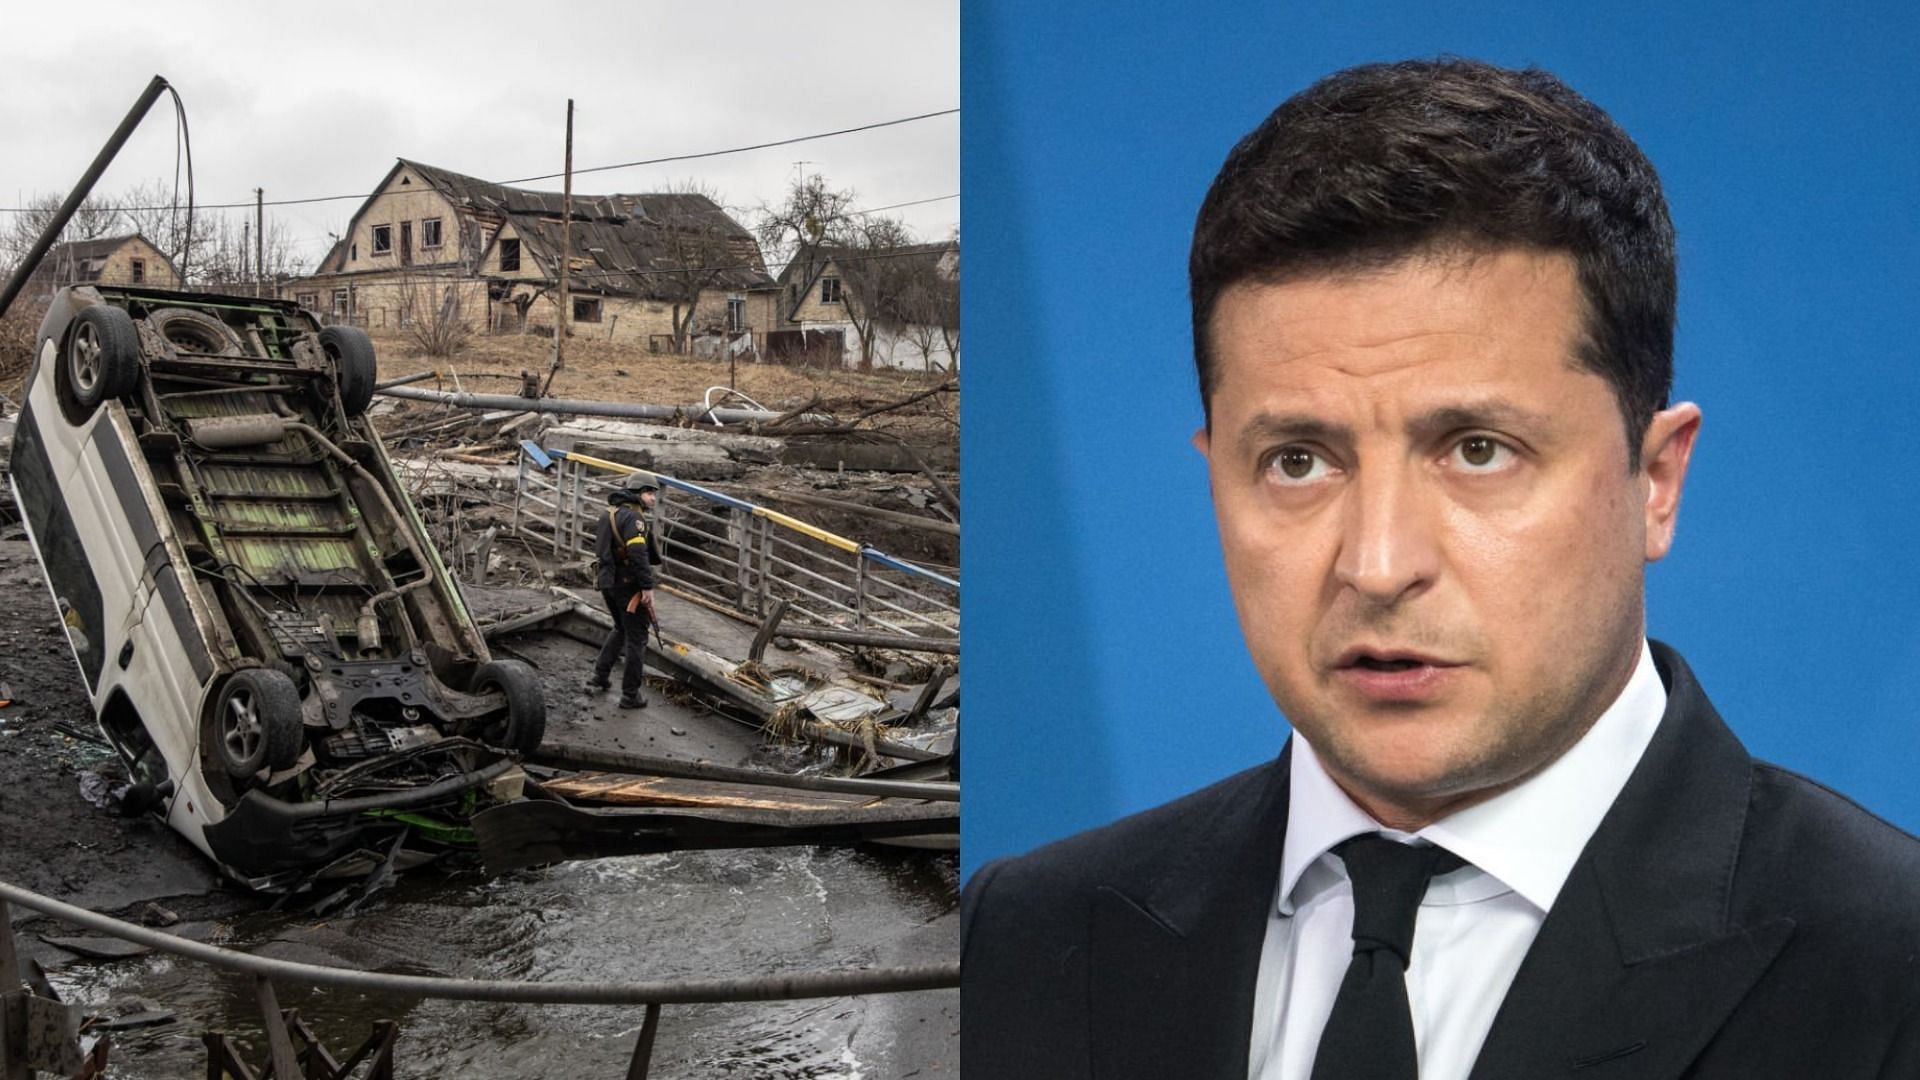 Ukrainian President Volodymyr Zelensky condemned the alleged massacre in Bucha amid the ongoing Russia-Ukraine crisis (Image via Chris McGrath/Getty Images and Stefanie Loos/Getty Images)